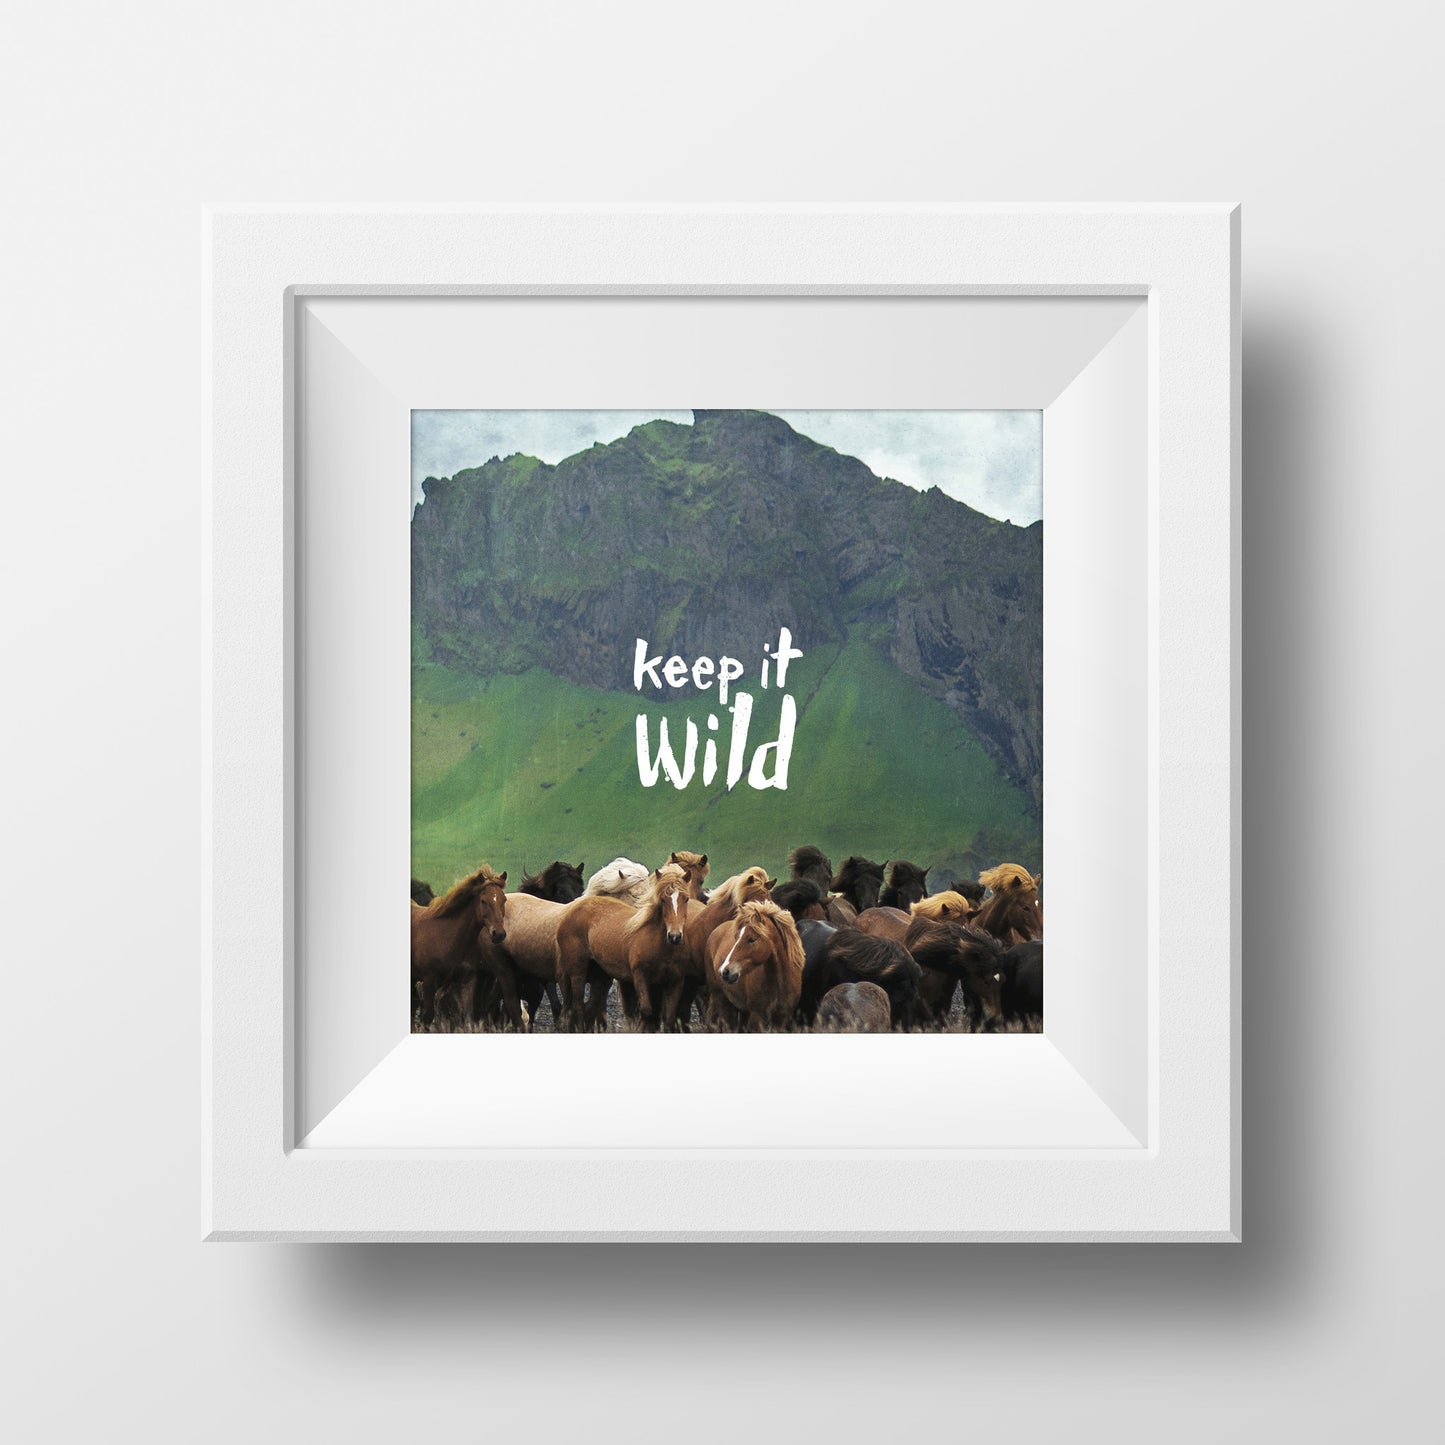 Discontinued 5x5" Print <br>Keep it Wild Icelandic Horses <br> Textured Matte Finish